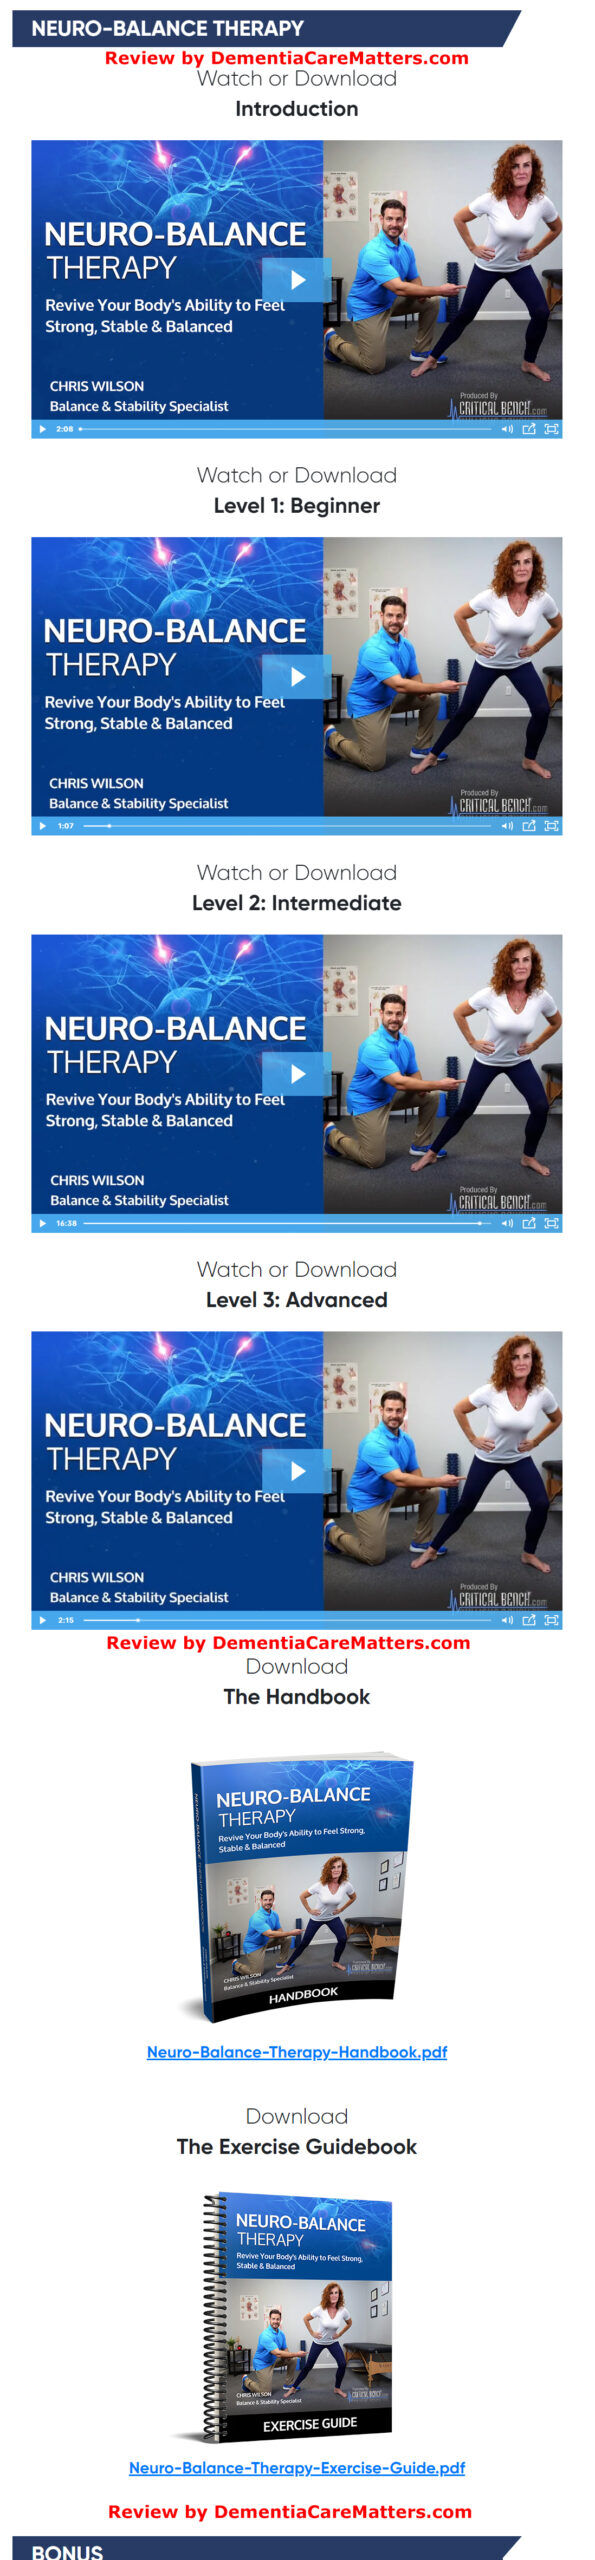 Neuro-Balance Therapy Download Page